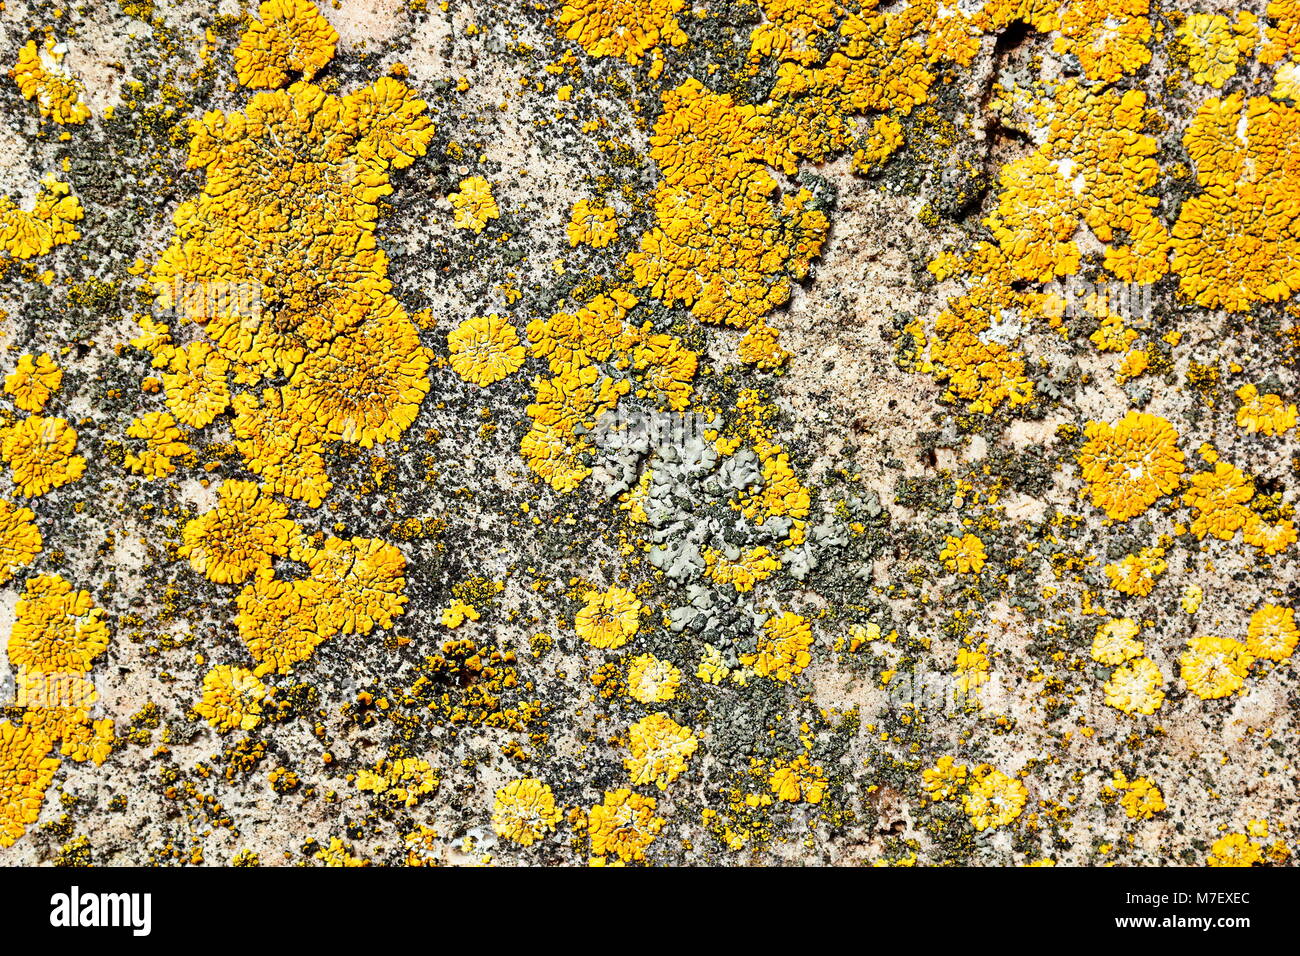 yellow moss on stone surface, natural damage of building facade Stock Photo